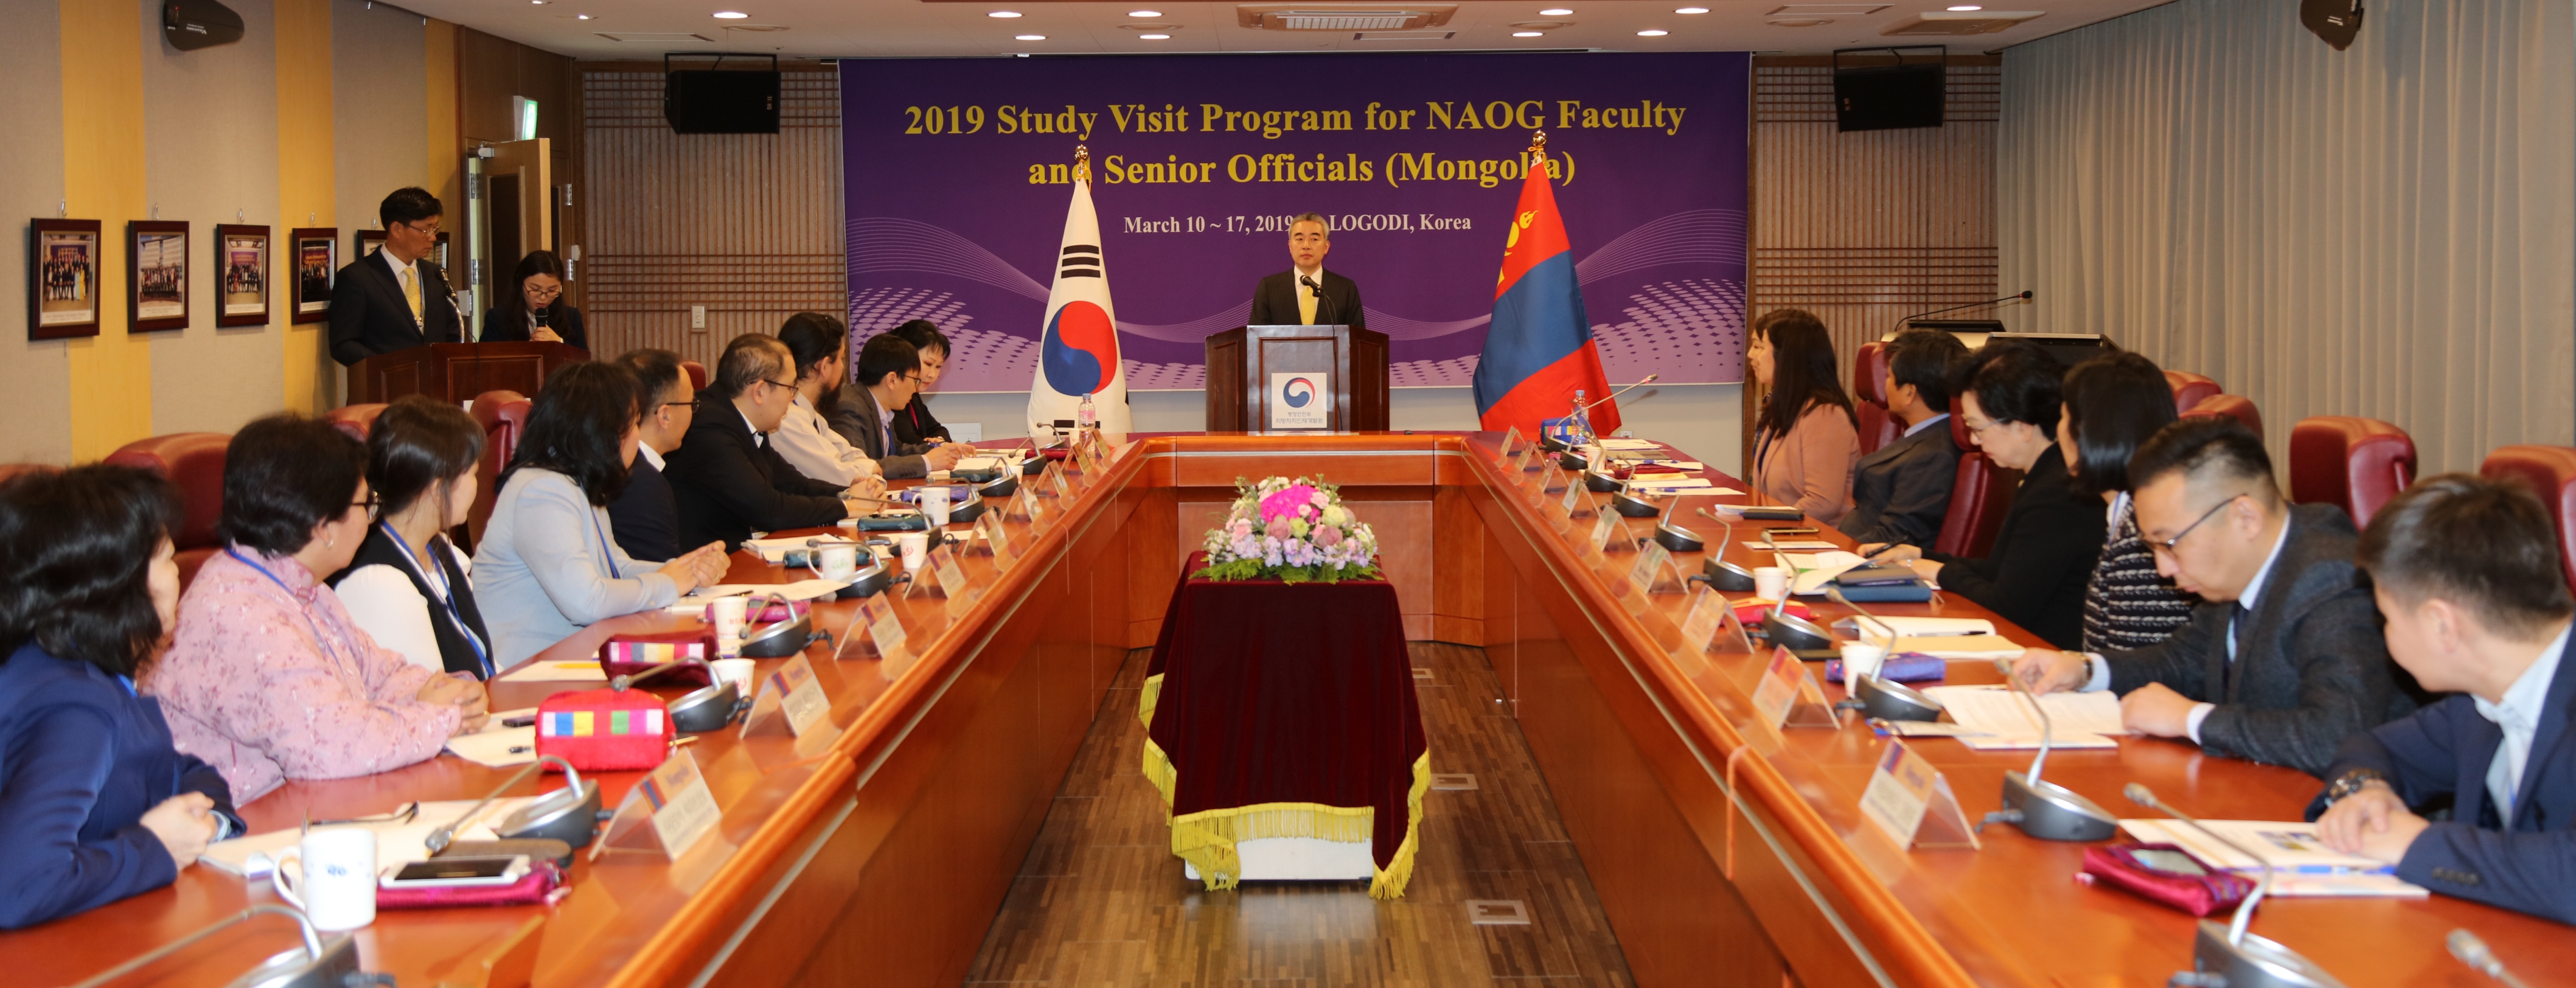 LOGODI President%2C Mr. Park Jae-min delivers a welcome remarks at the opening ceremony of %26%2339%3BStudy Visit Program for NAOG Faculty and Senior Officials from Mongolia%26%2339%3B 큰 이미지[마우스 클릭 시 창닫기]